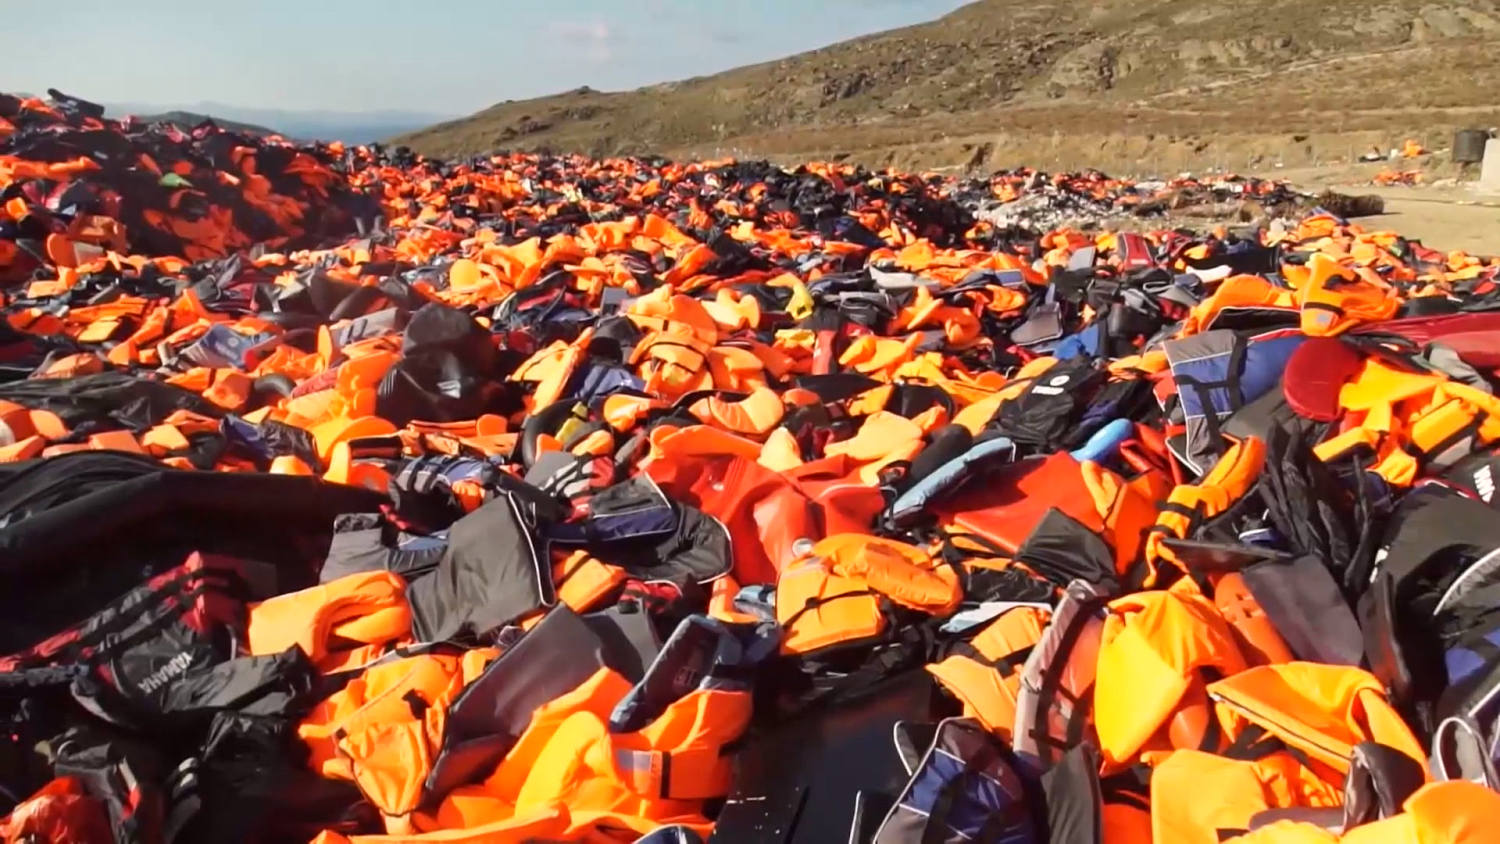 Life Jacket Mound Increases as Migrants Arrive on Lesbos